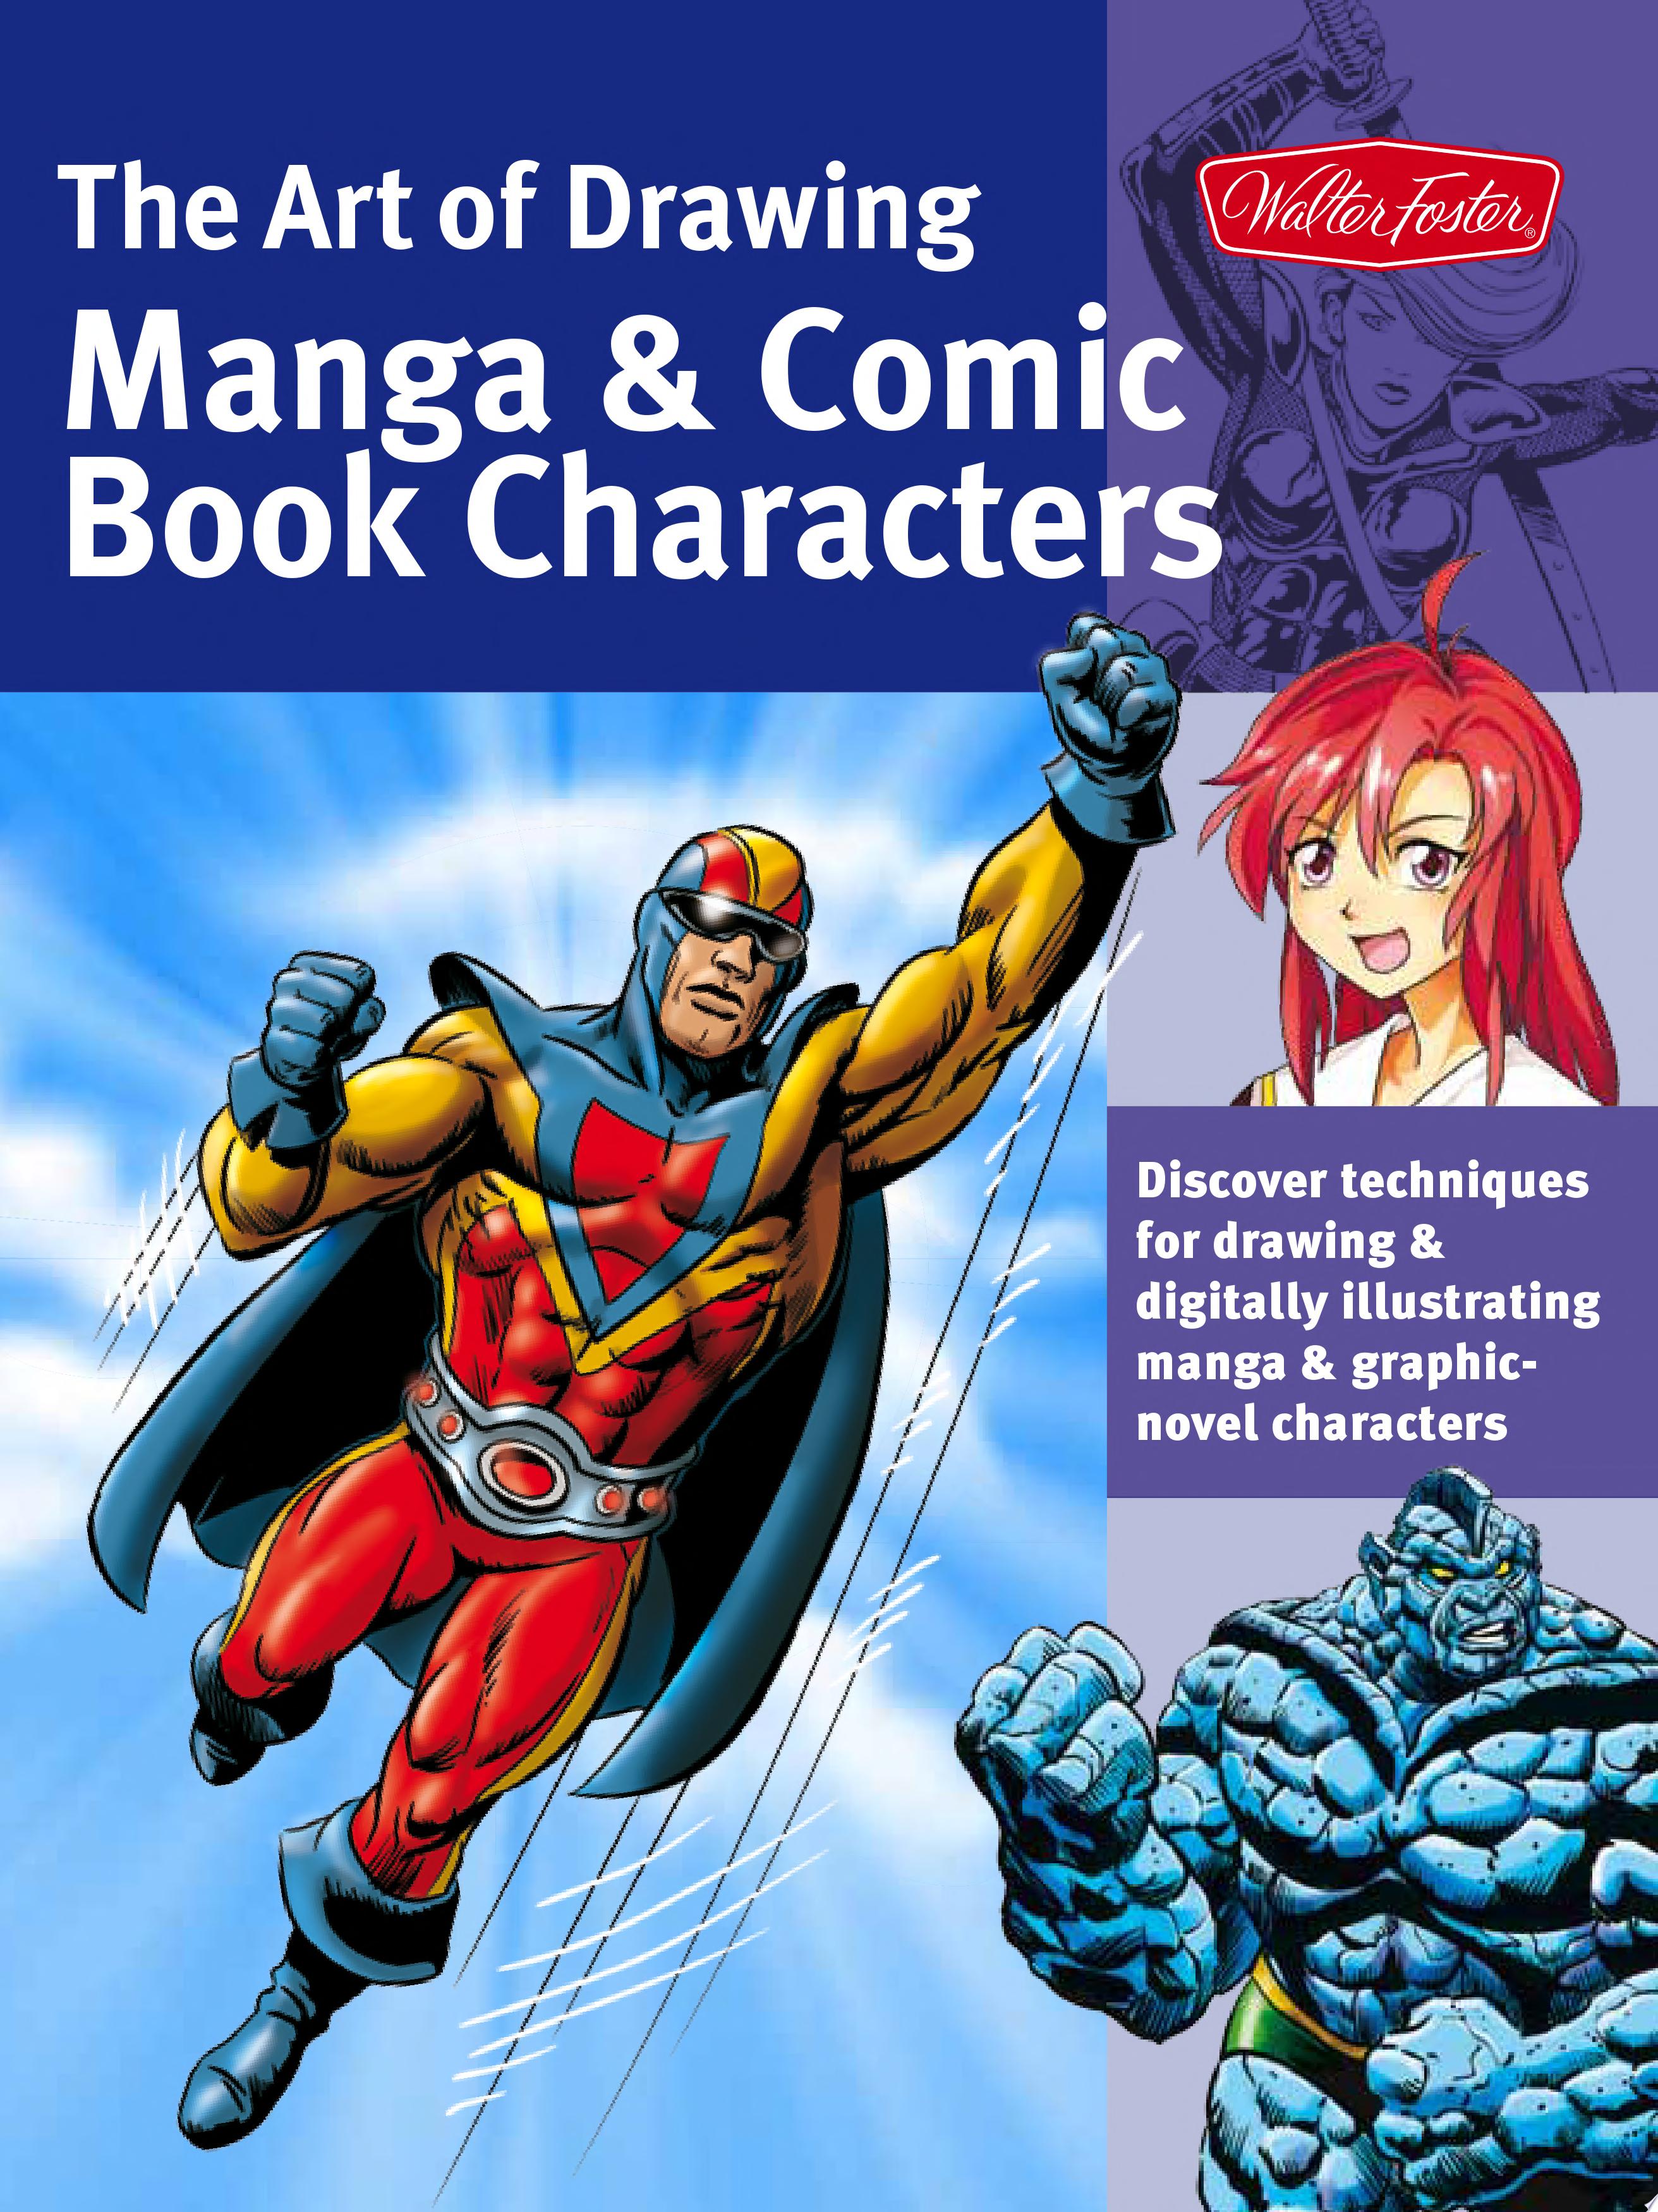 Image for "The Art of Drawing Manga &amp; Comic Book Characters"